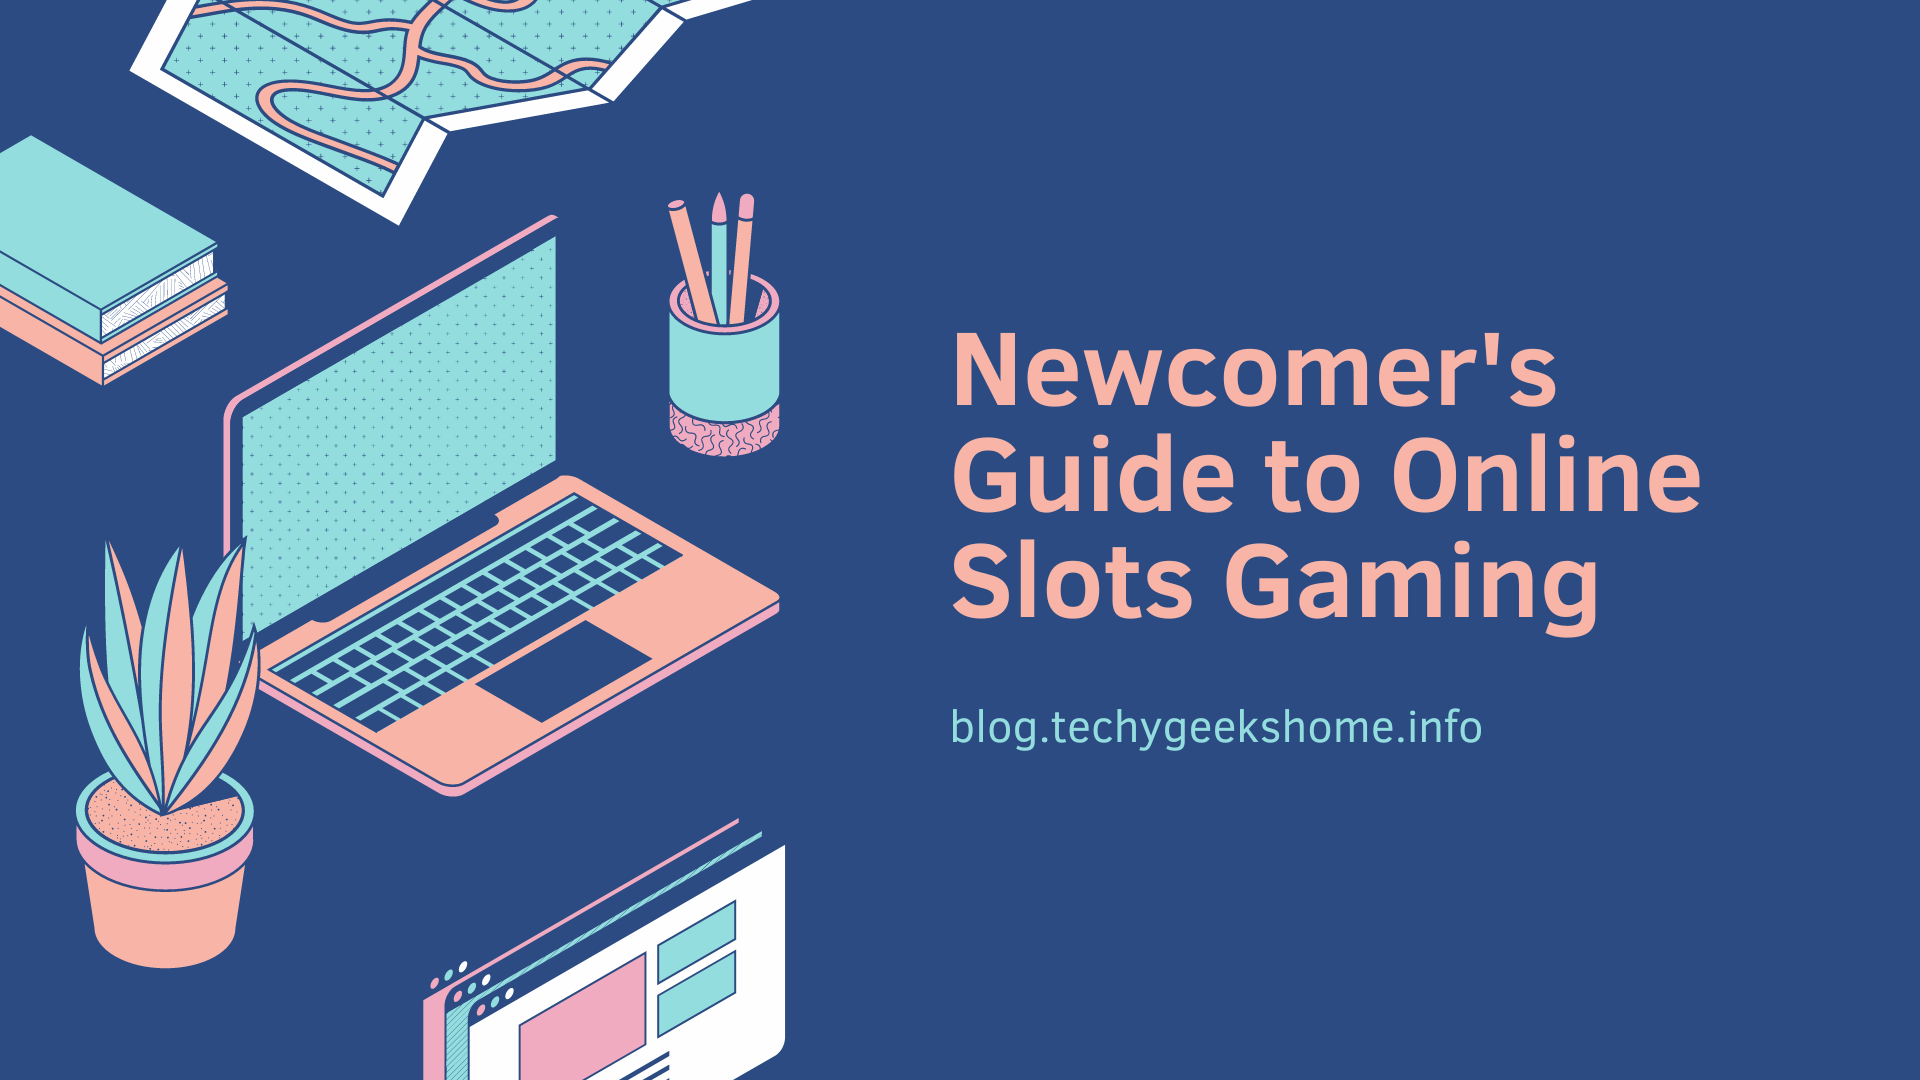 Newcomer's Guide to Online Slots Gaming